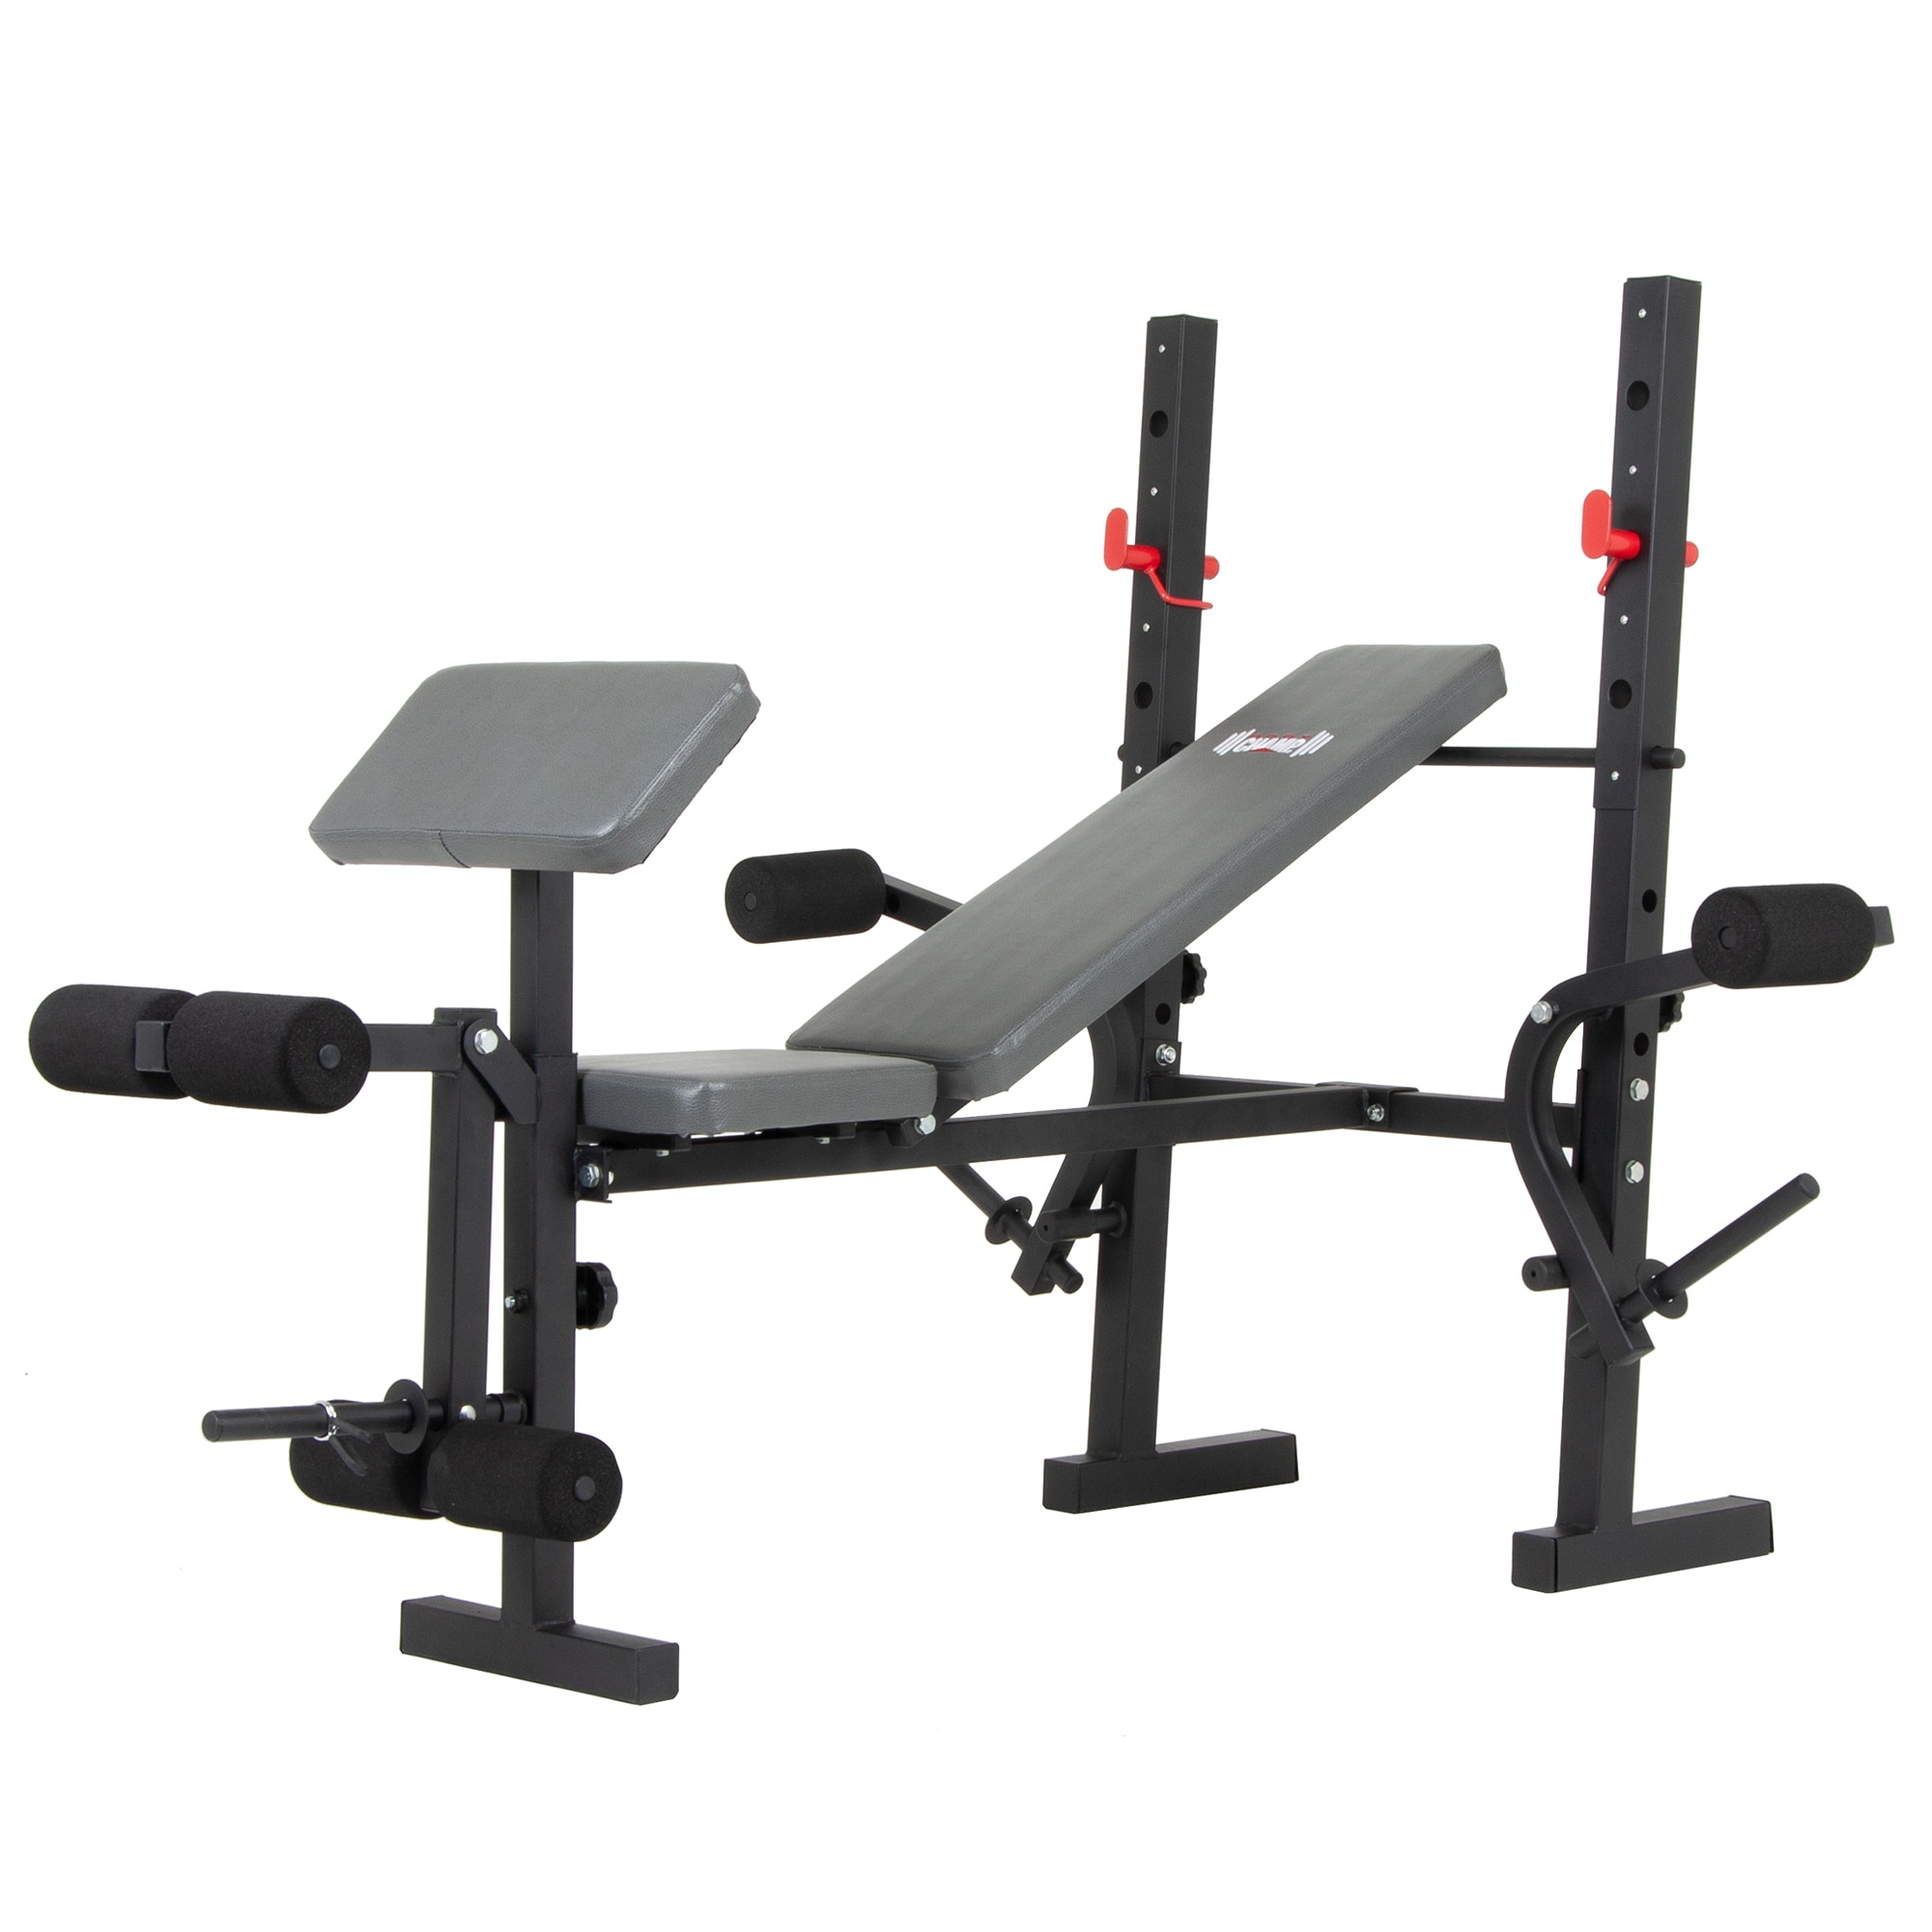 Sportsroyals Workout Bench, Adjustable Weight Bench for Home Gym, 750LBS  Weight Capacity for Full Body Workout